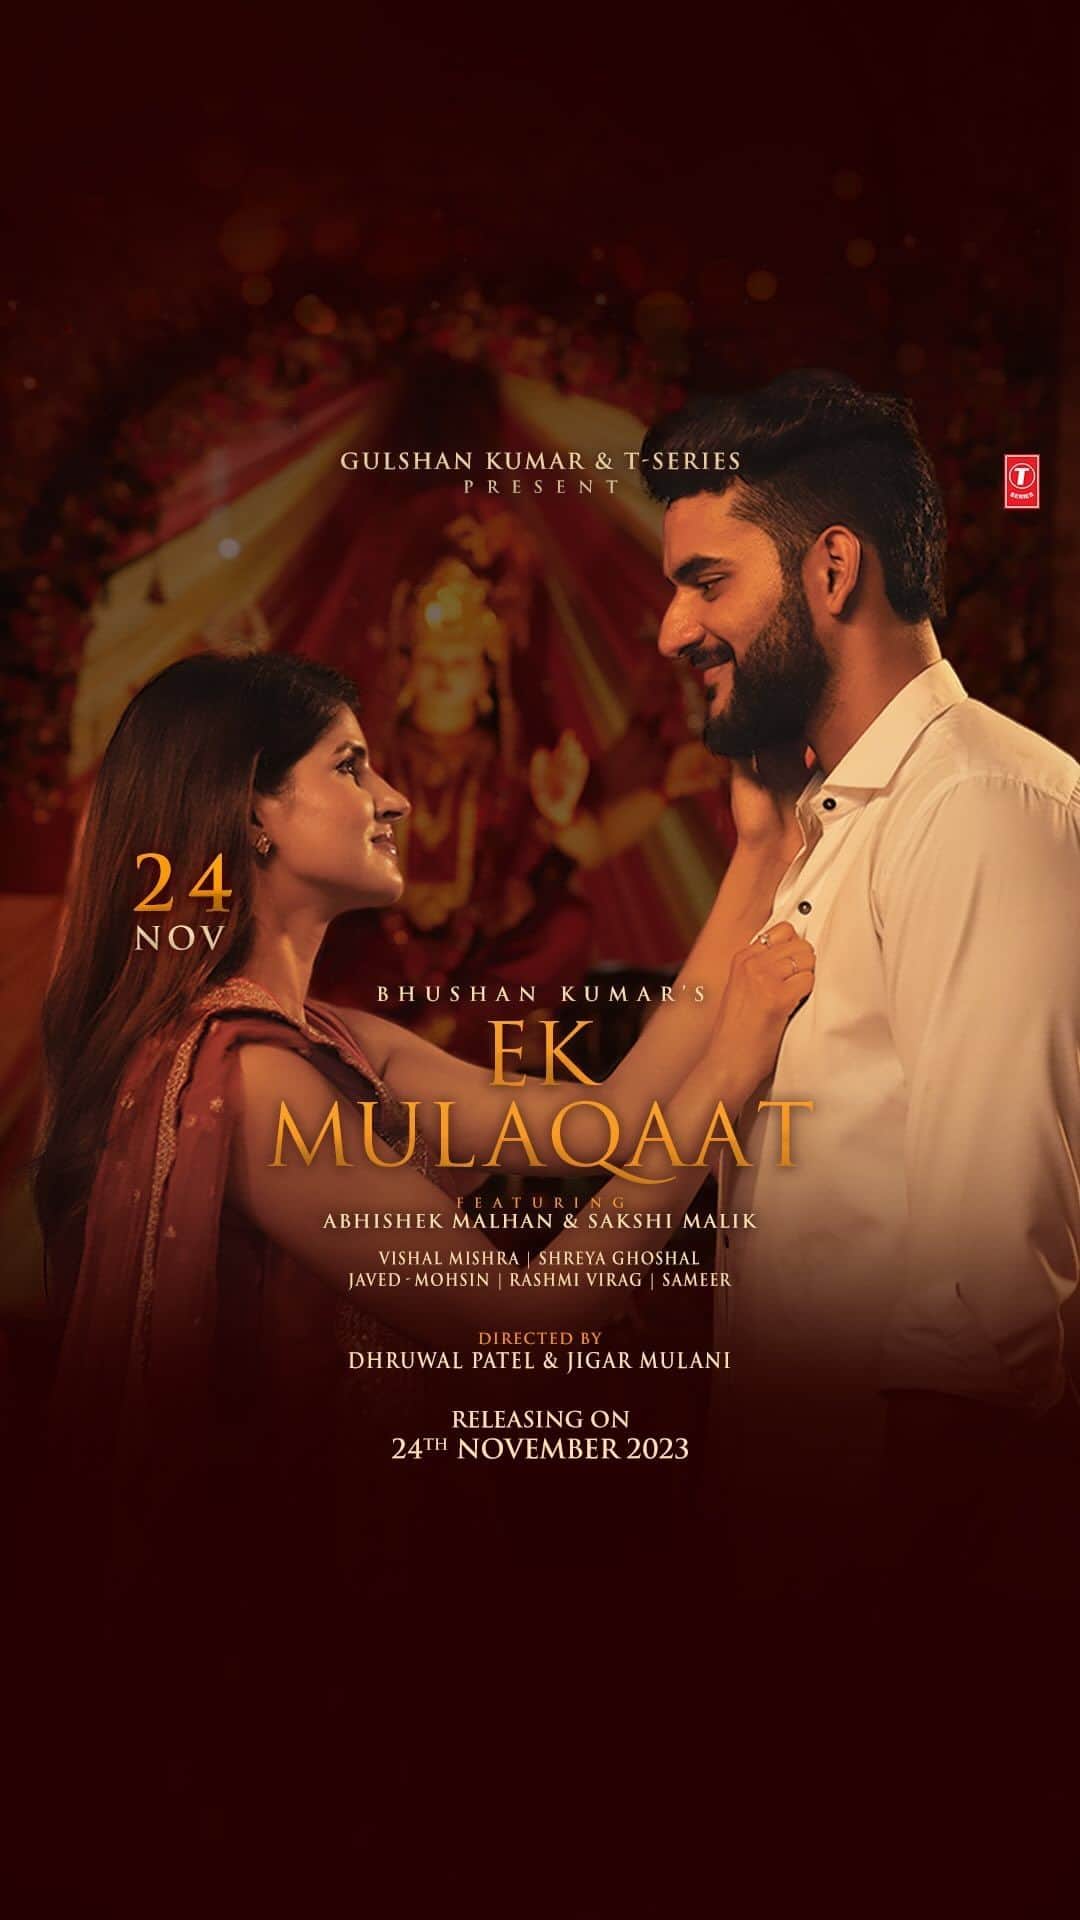 Sakshi Malikのインスタグラム：「Get ready to witness the first glimpses of #EkMulaqaat as the trailer unveils the tale we’ve poured our hearts into. ❤‍🔥🎞️   Story Unveils on 24th November 2023  #tseries #BhushanKumar @tseries.official @vishalmishraofficial @fukra_insaan @shreyaghoshal @javedmohsin_official #Sameer @dhruwal.patel @jigarmulani @castingchhabra」